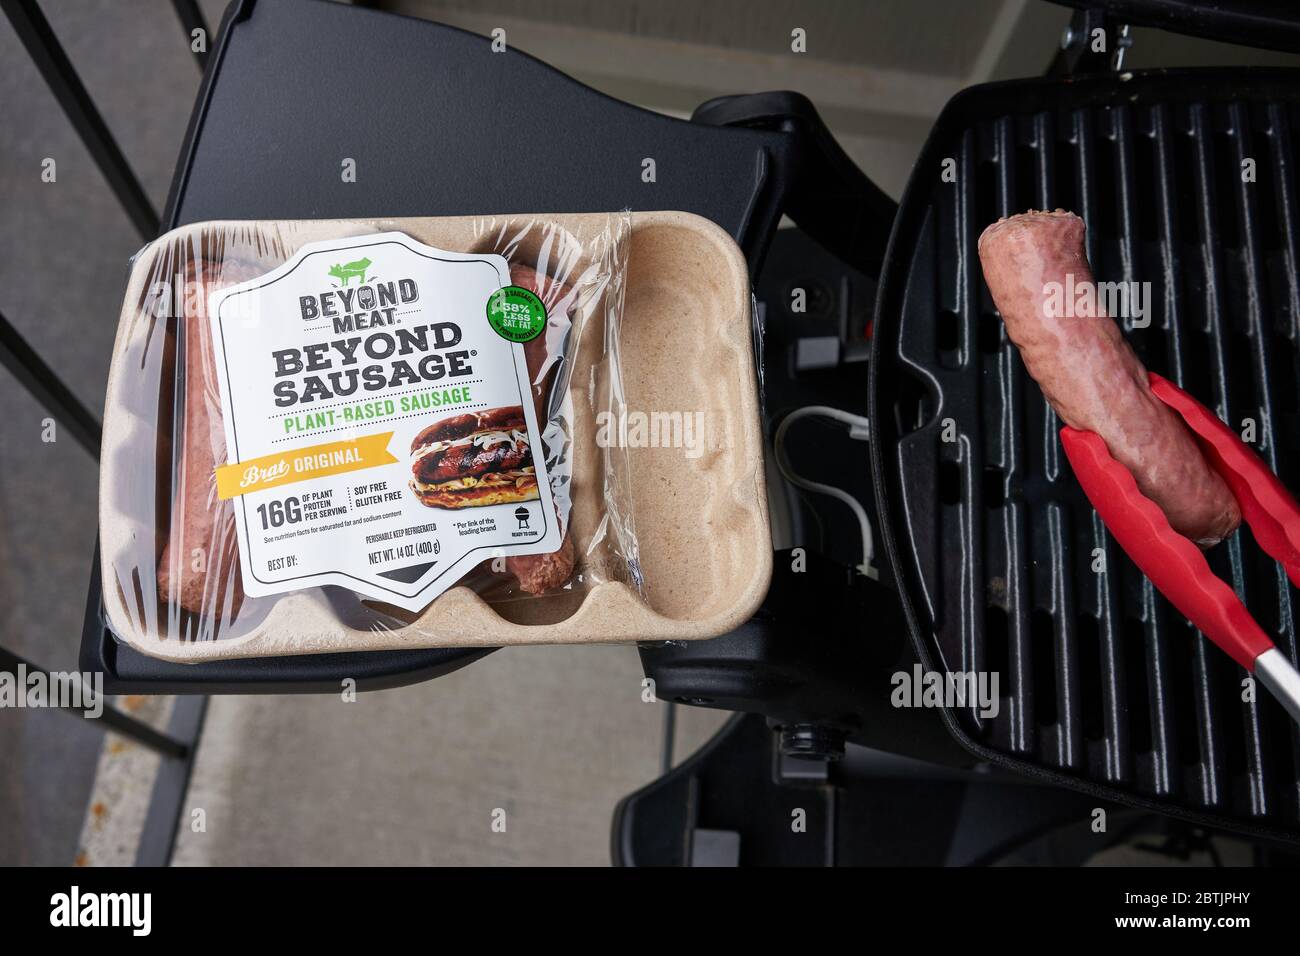 BEYOND MEAT brand plant-based Beyond Sausage on the grill. Stock Photo